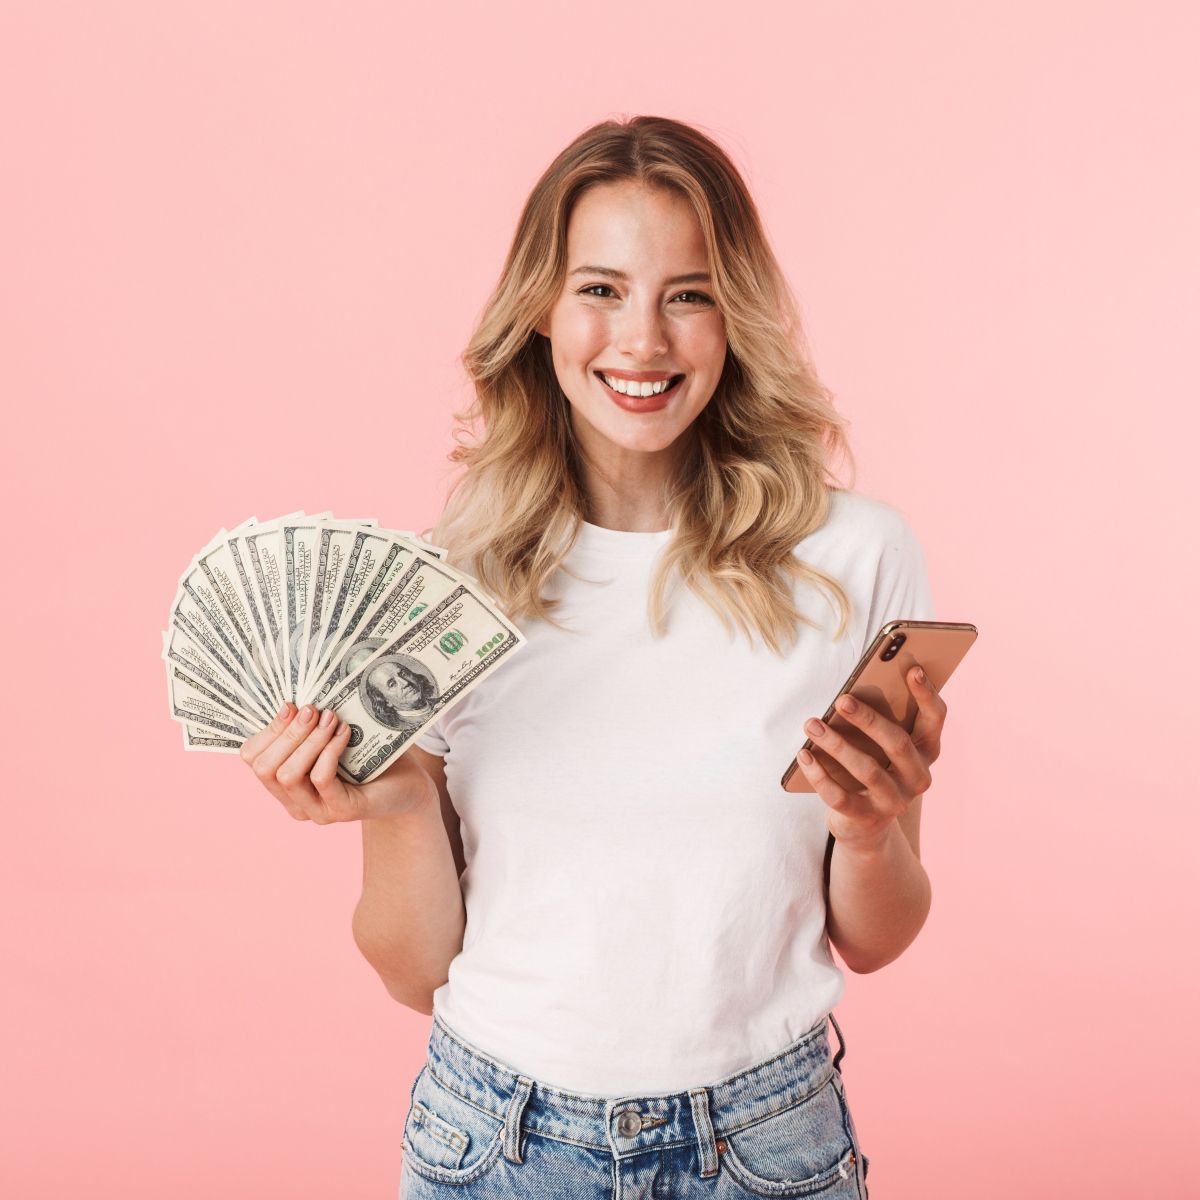 Young blond woman smiling holding cash in one hand and cellphone on the other